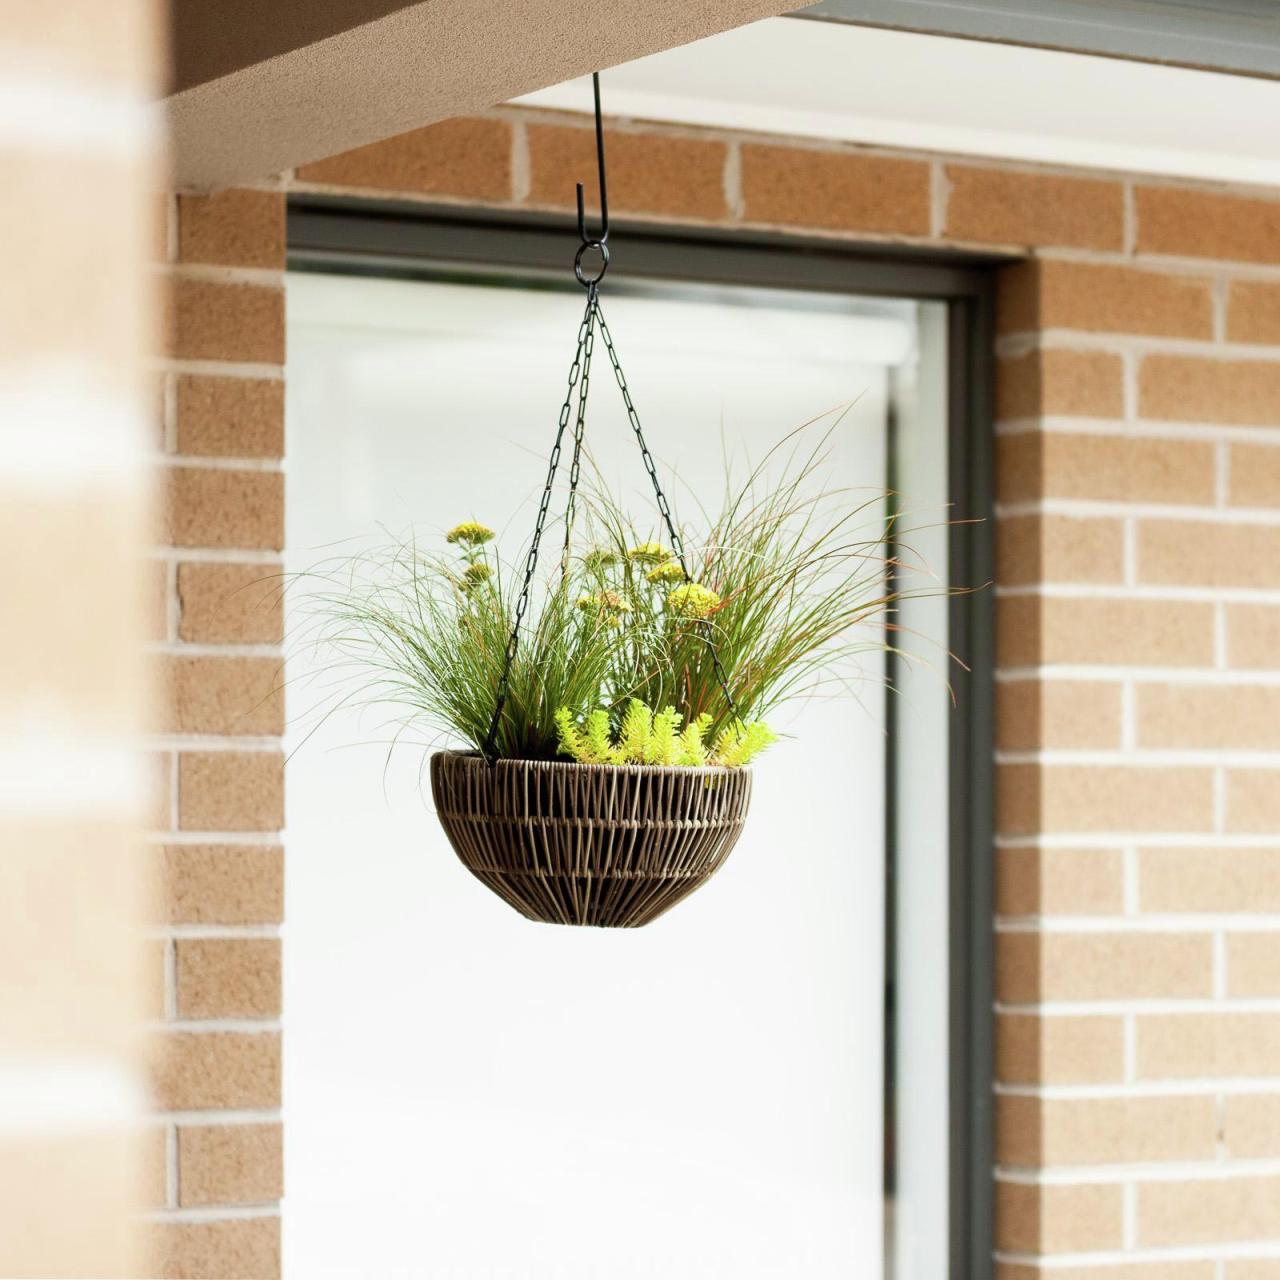 Hanging Plants Indoor | Hanging Baskets at Bunnings: A Guide to Varieties, Selection, and Care